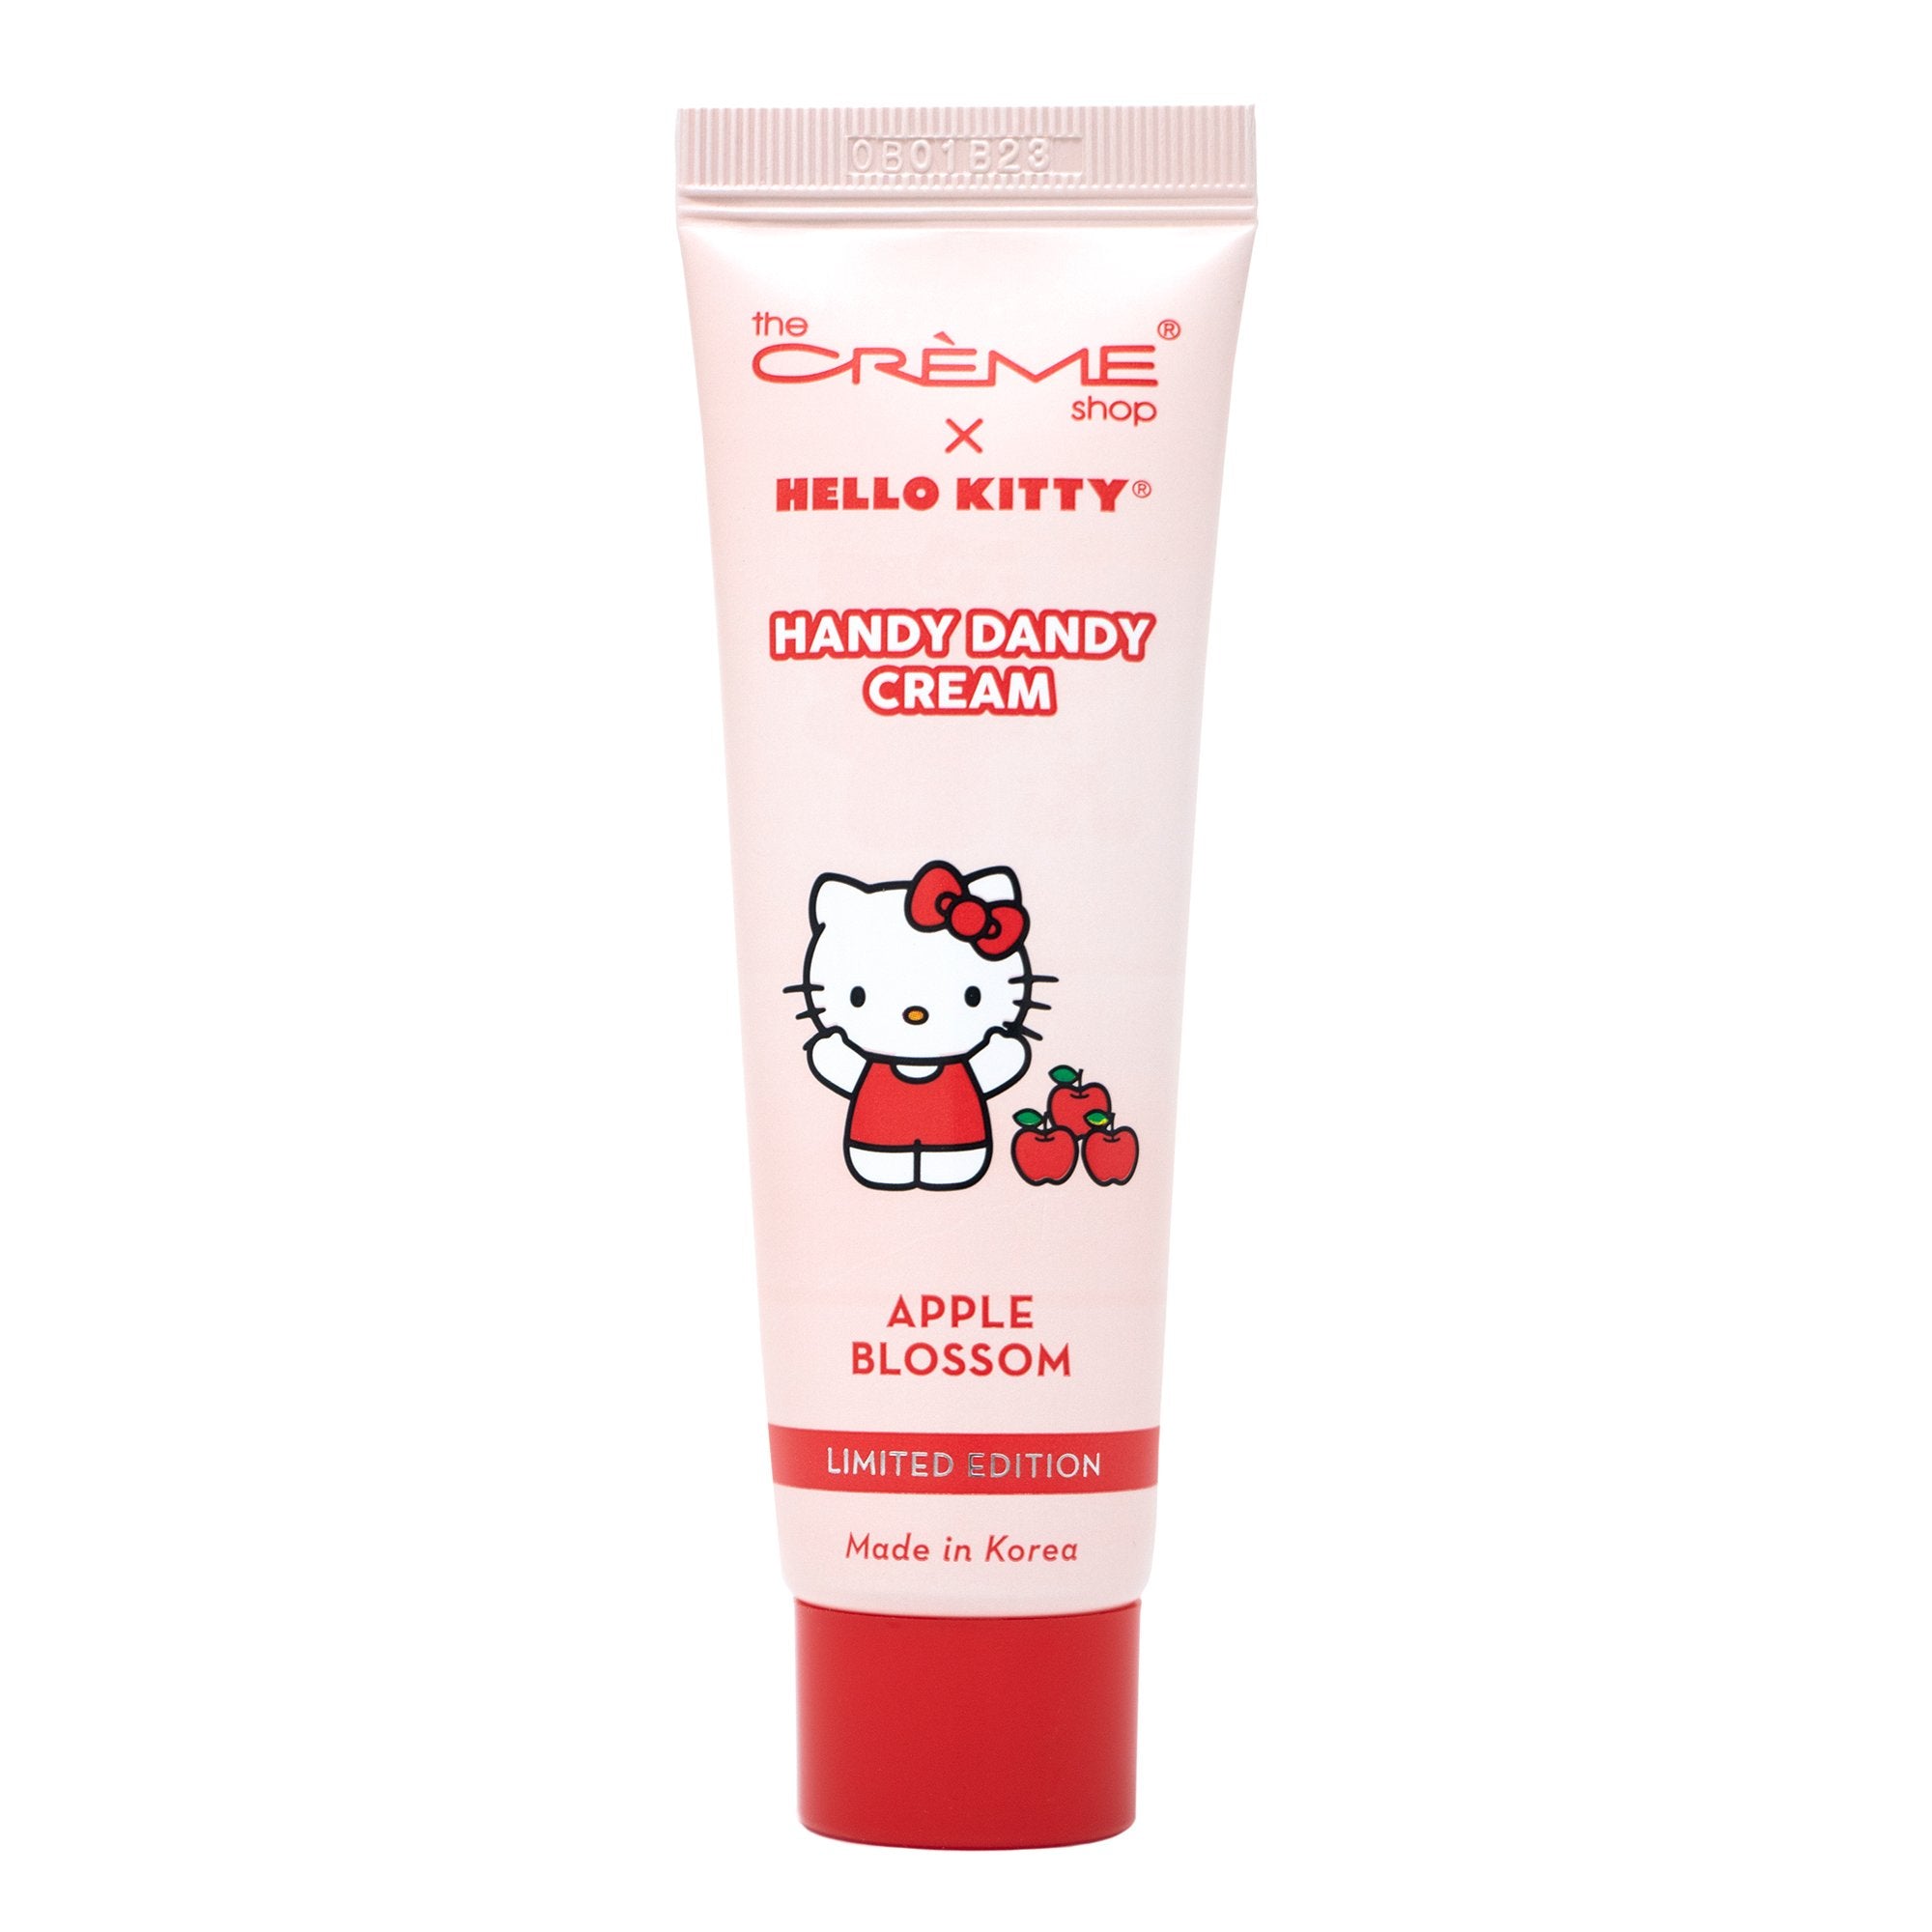 The Crème Shop x Hello Kitty Handy Dandy Cream (Limited Edition) | Apple Blossom (Travel-Sized)